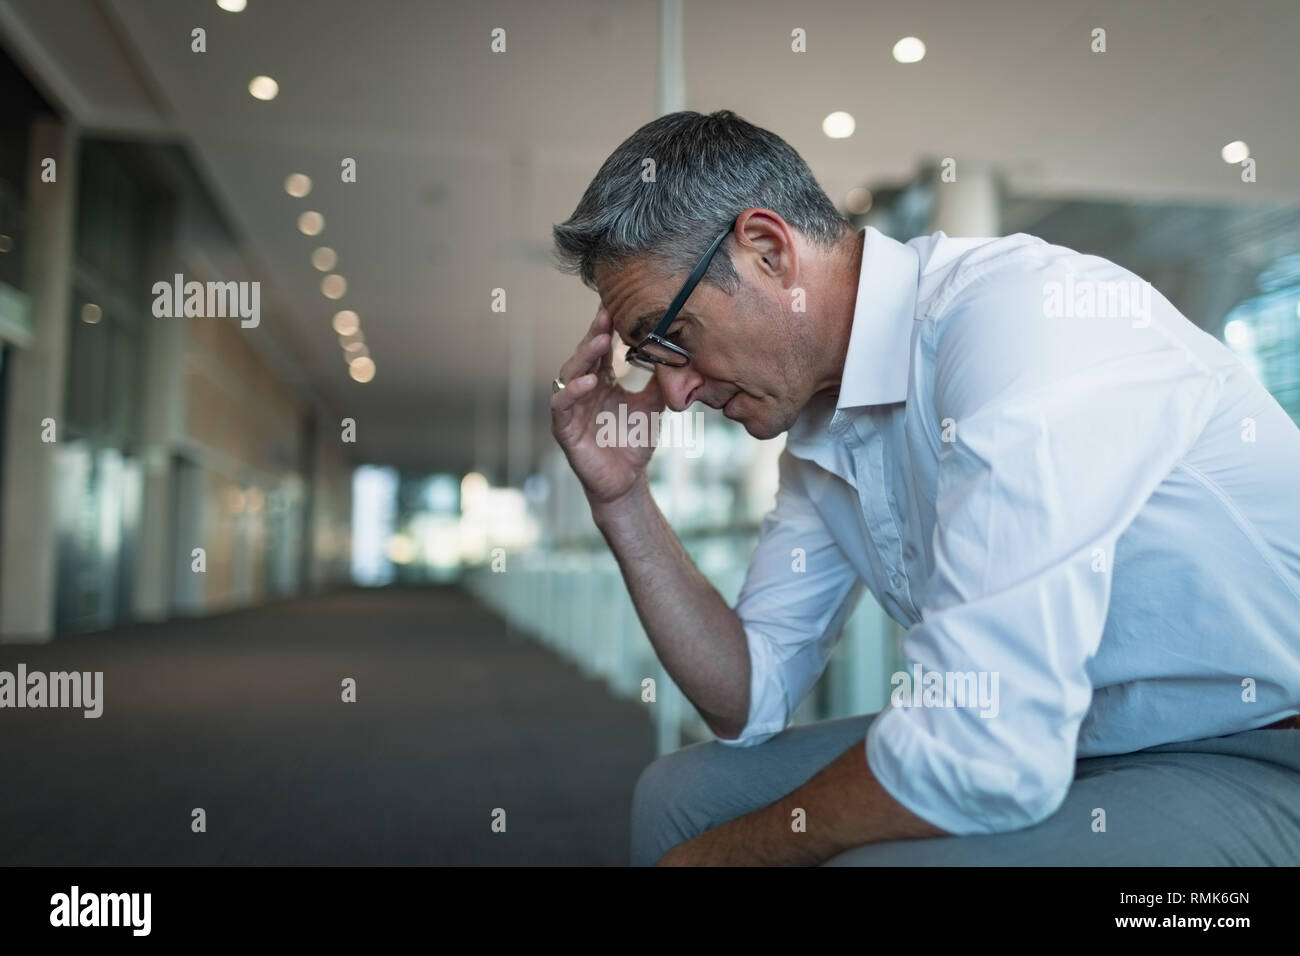 Frustrated businessman sitting in office corridor Stock Photo